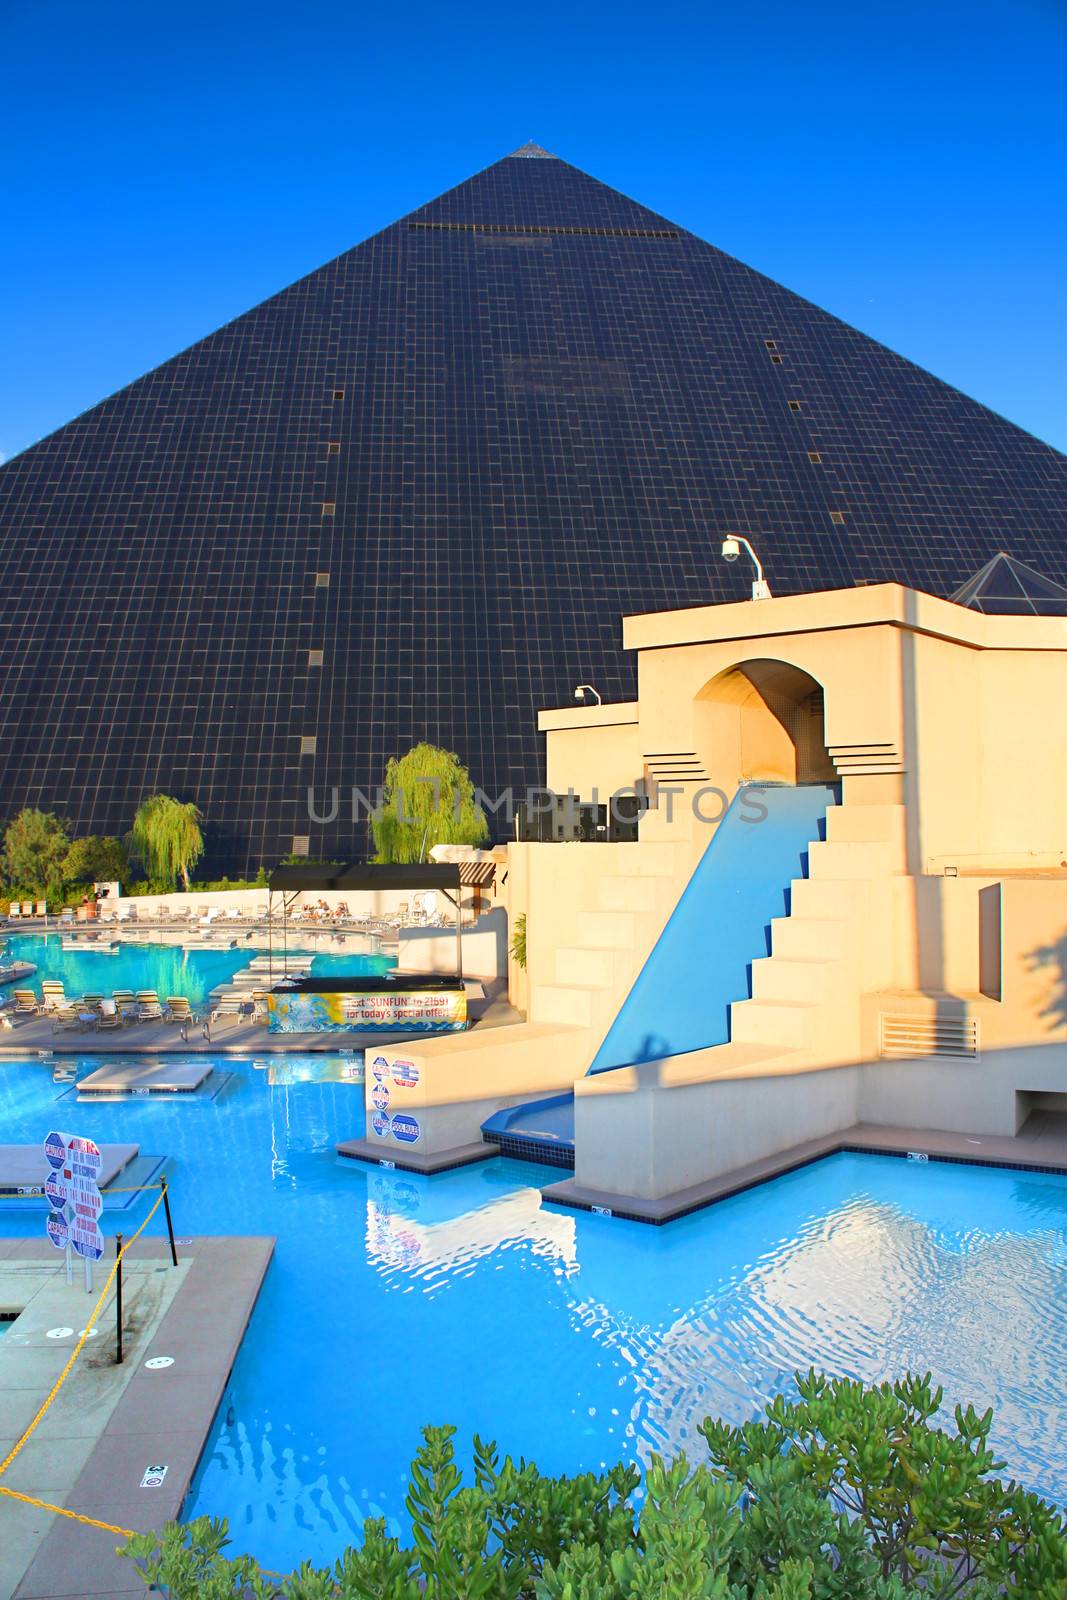 Las Vegas, USA - August 19, 2009: Luxor Las Vegas is an Egyptian themed hotel and casino on the famous Las Vegas Strip.  Luxor opened in 1993 and features this pyramid shaped hotel building.